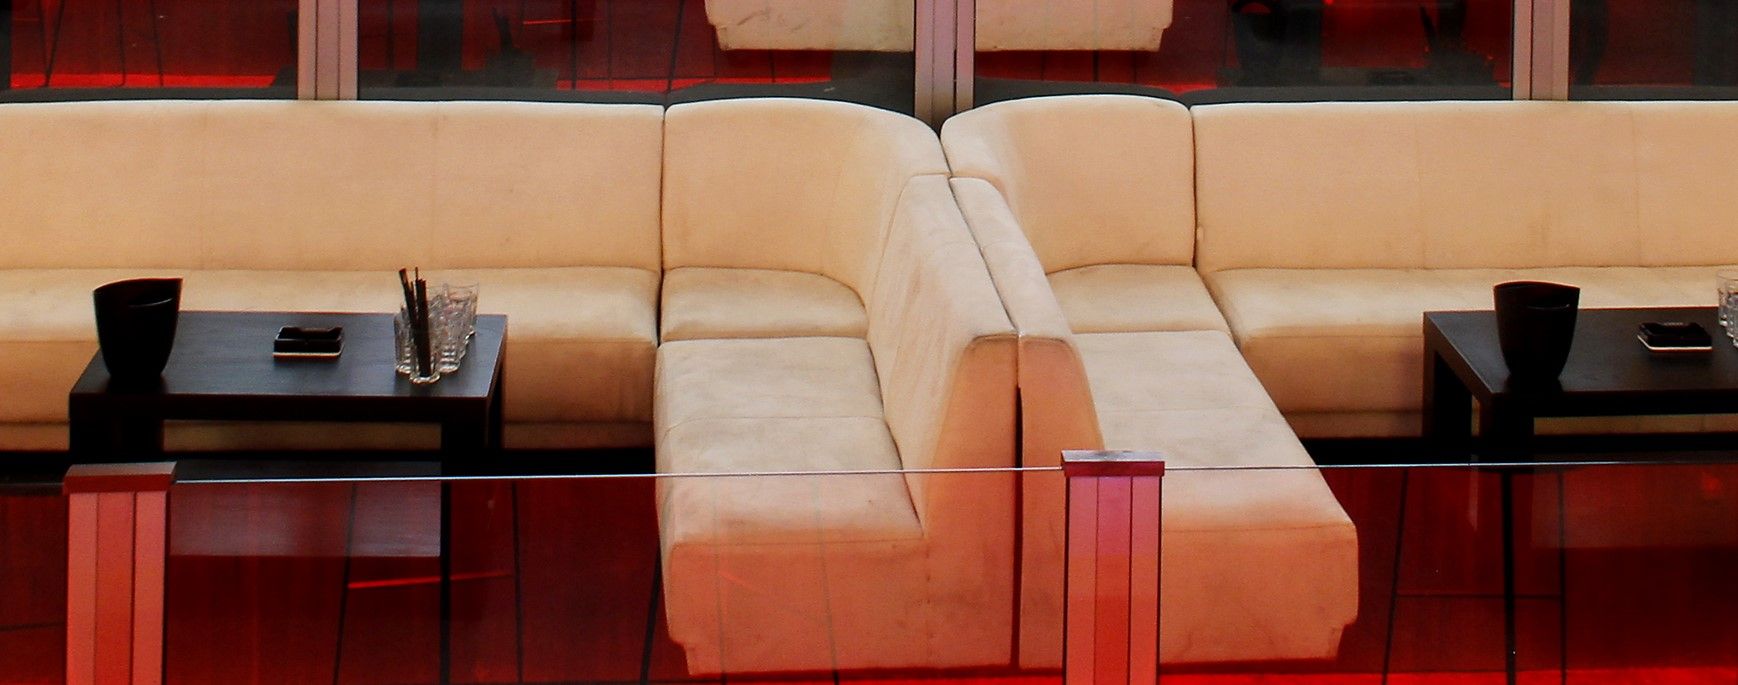 Commercial seating from smfoam